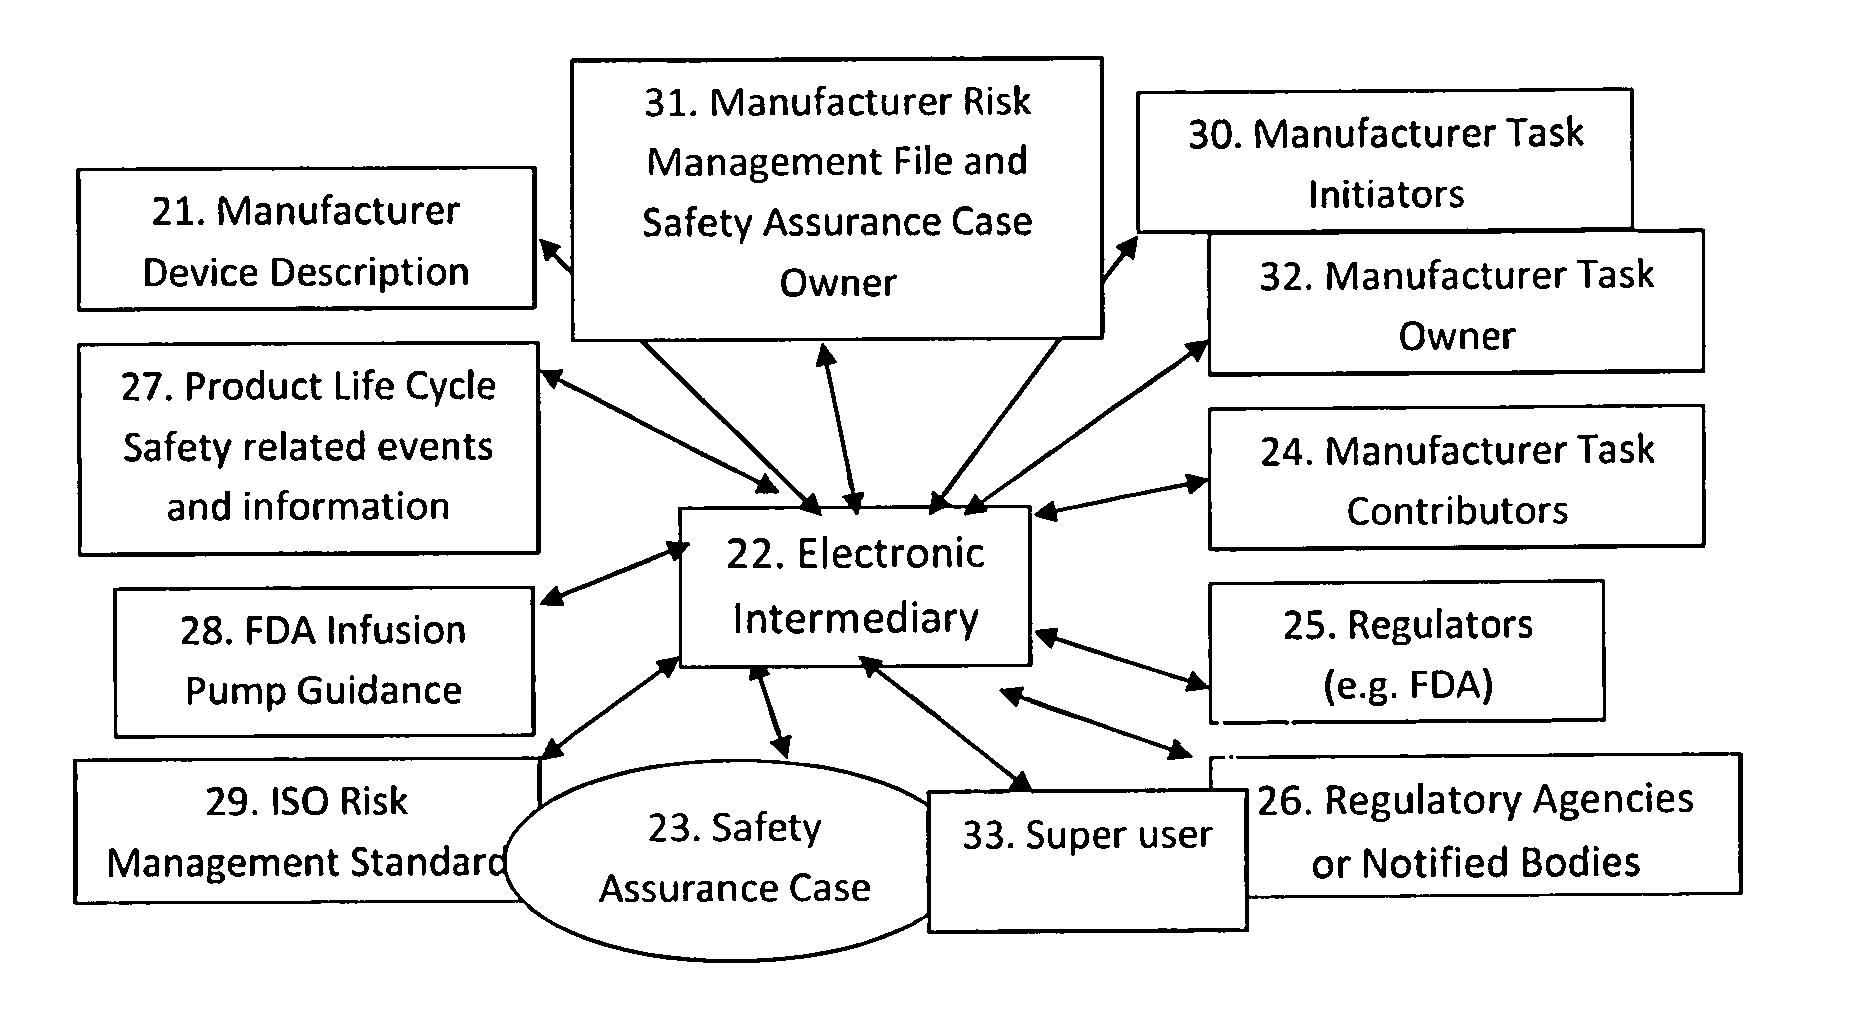 System for collecting and managing risk management file and safety assurance case data